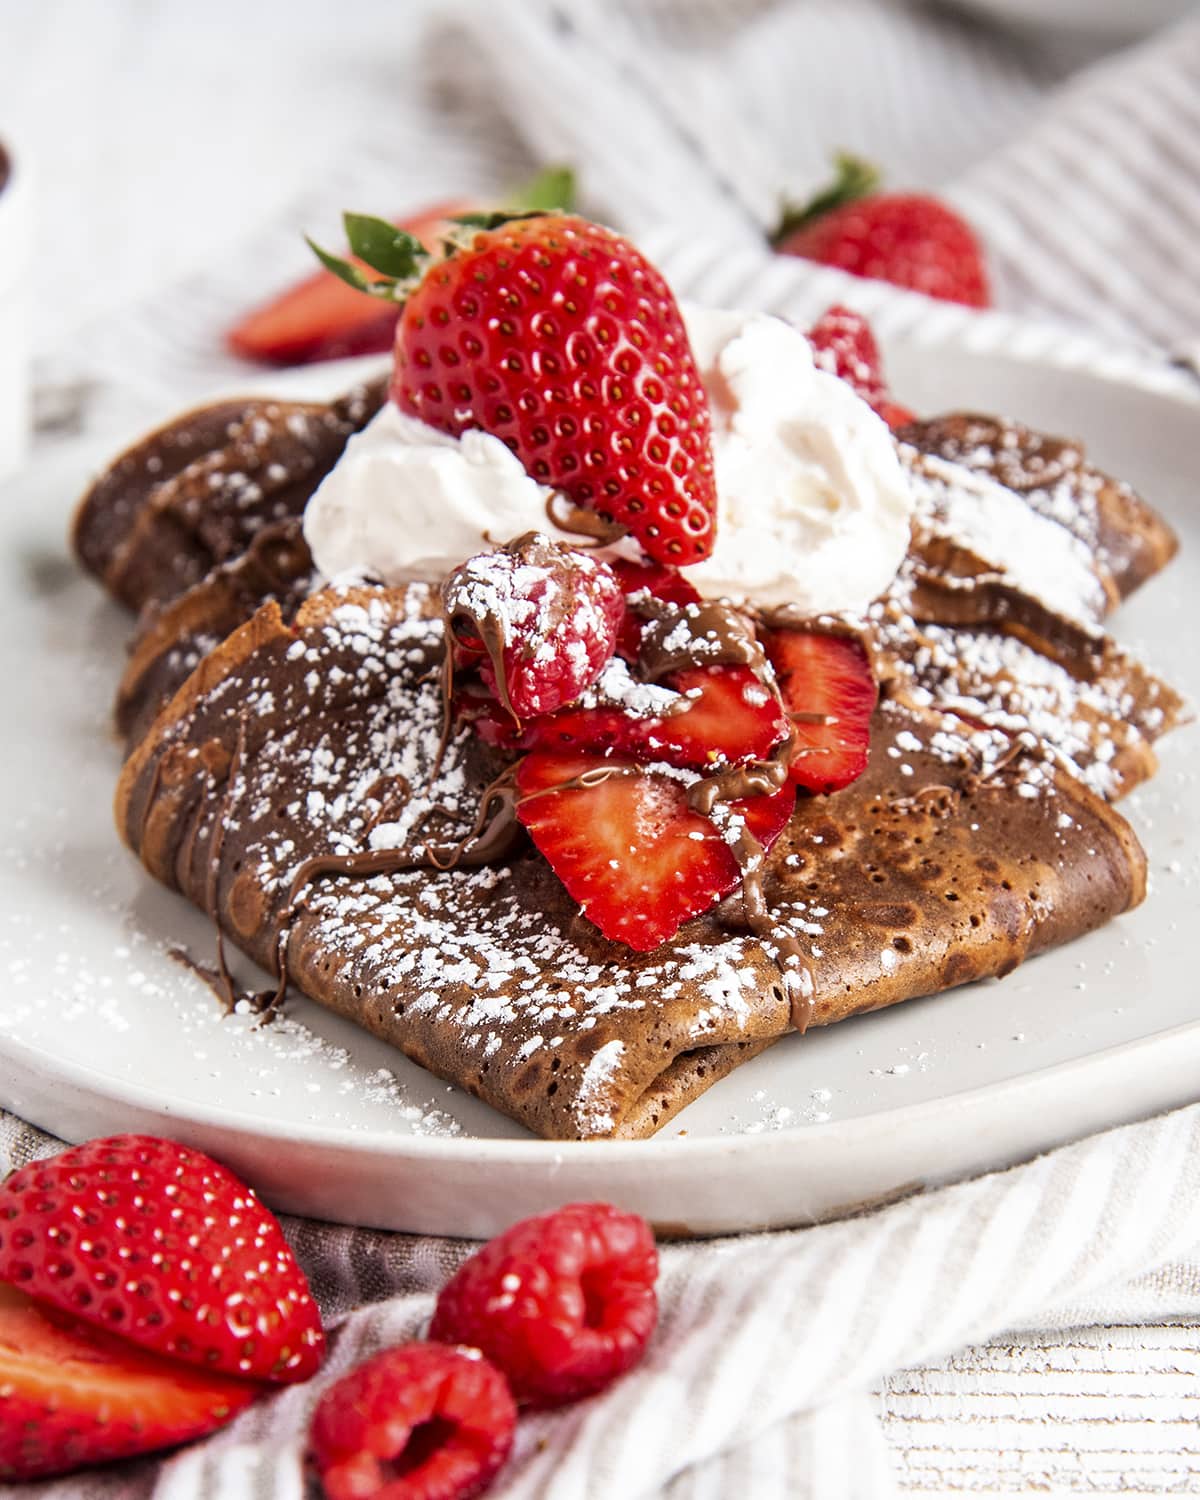 A plate of chocolate crepes folded up into quarters and topped with strawberries and nutella.